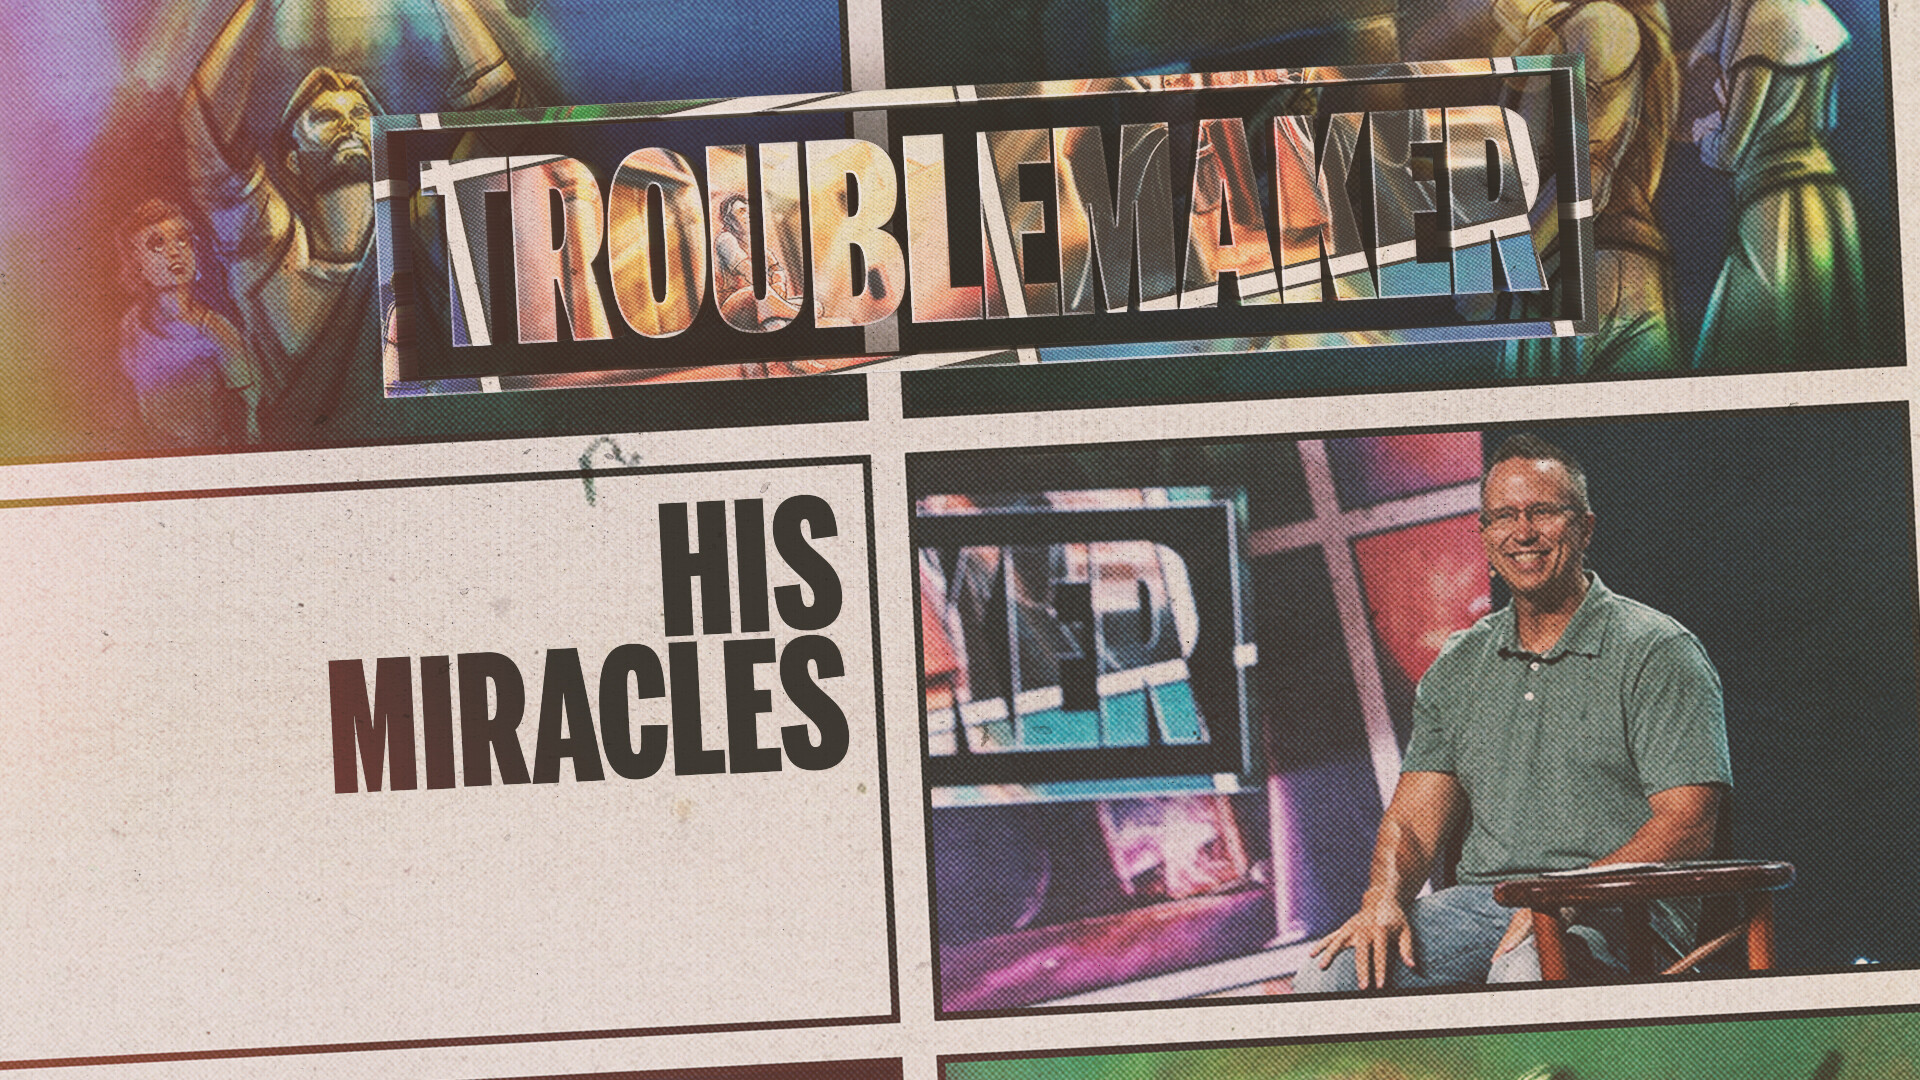 Watch Troublemaker - His Miracles